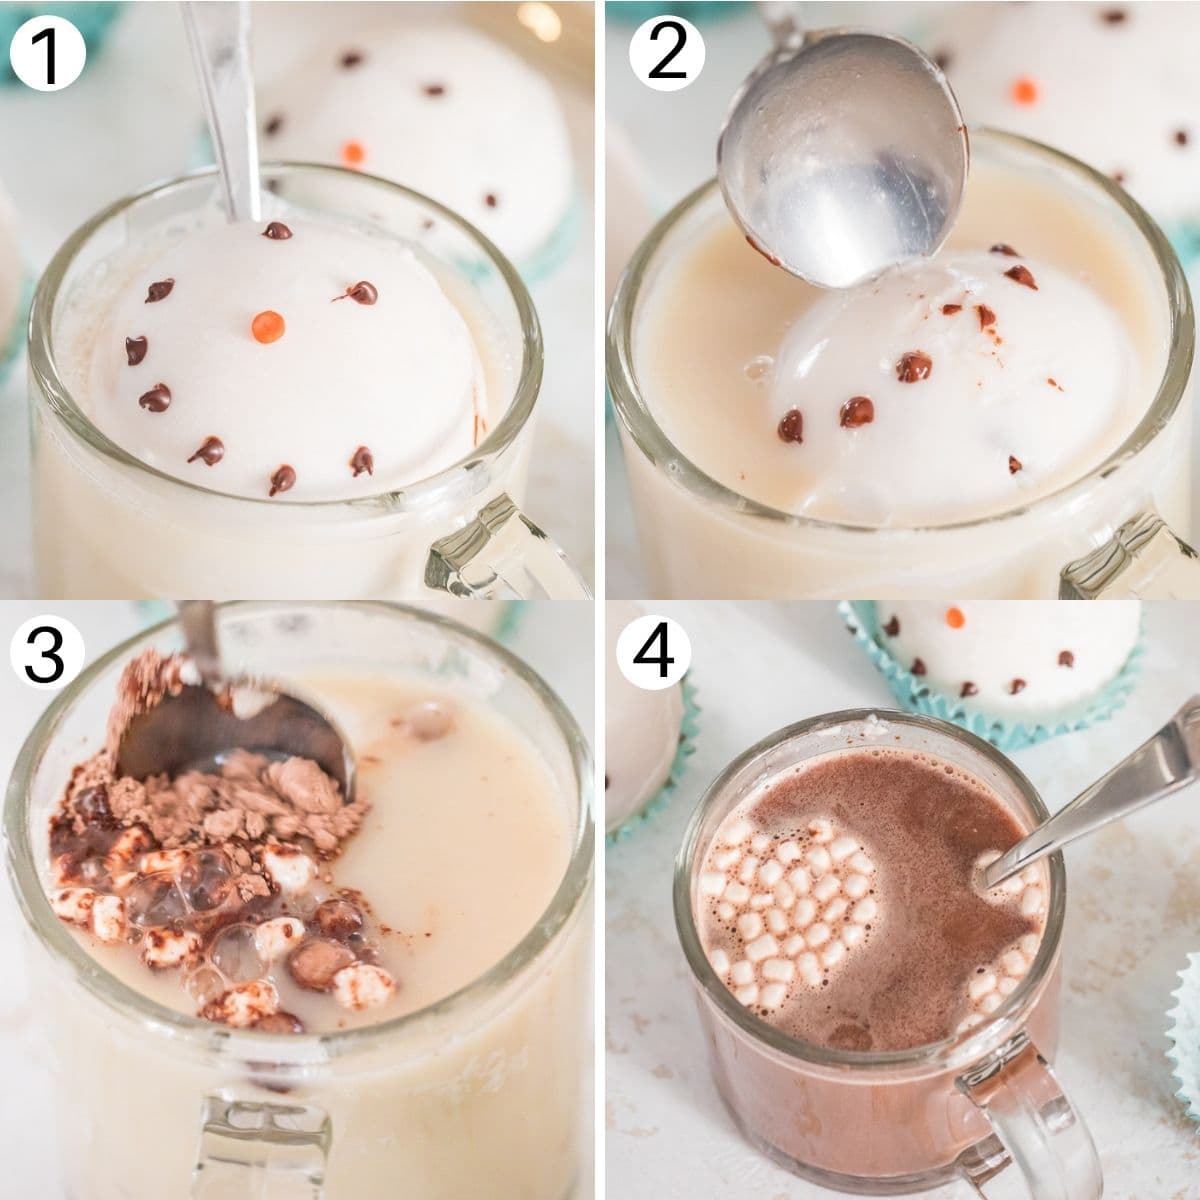 step by step photos showing how to use hot chocolate bombs placing in milk and stirring